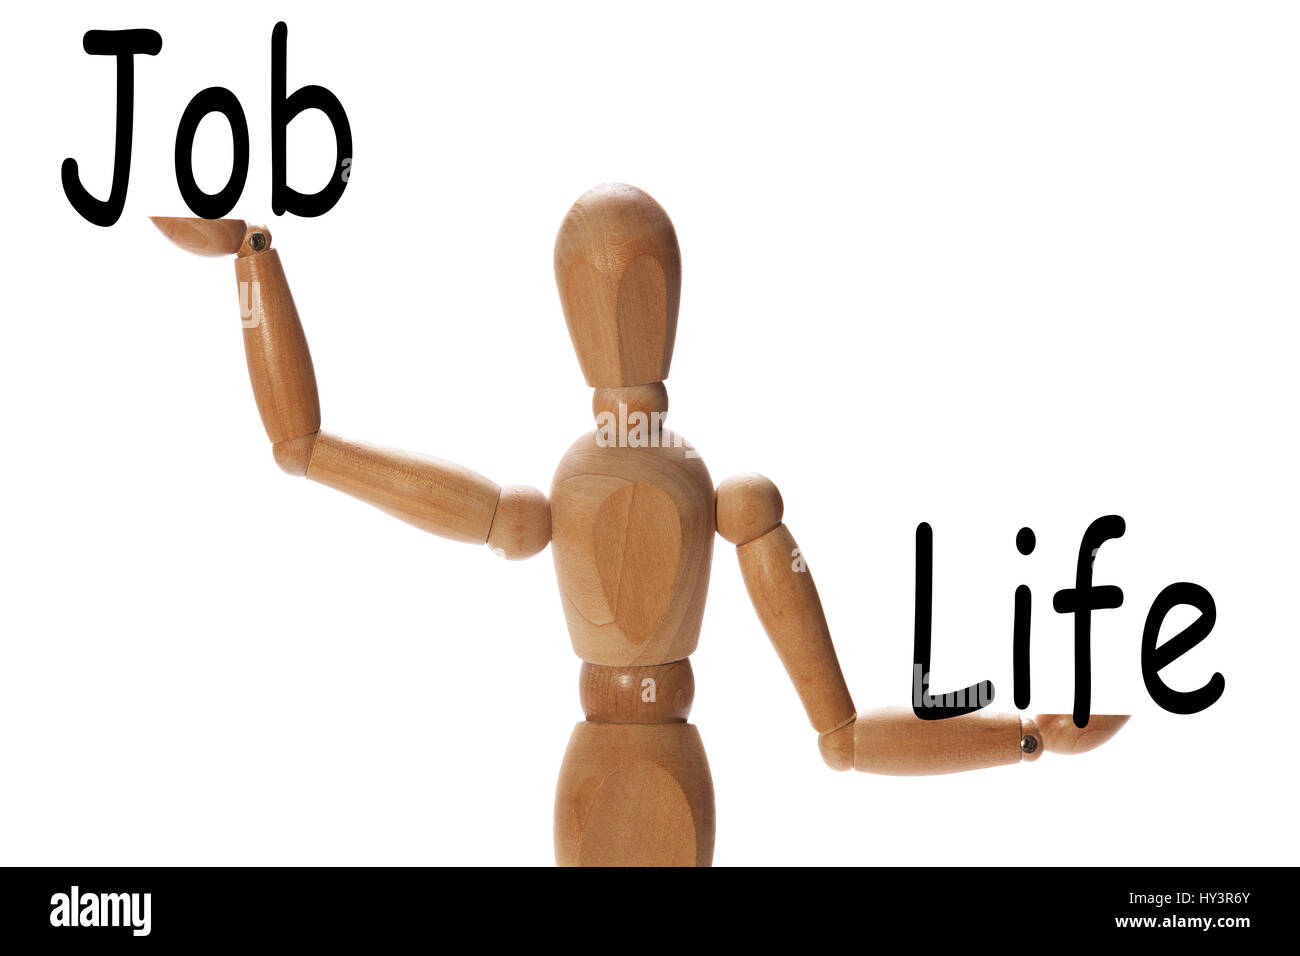 Mannequin measuring the importance of life versus the job on the palms of the hands Stock Photo